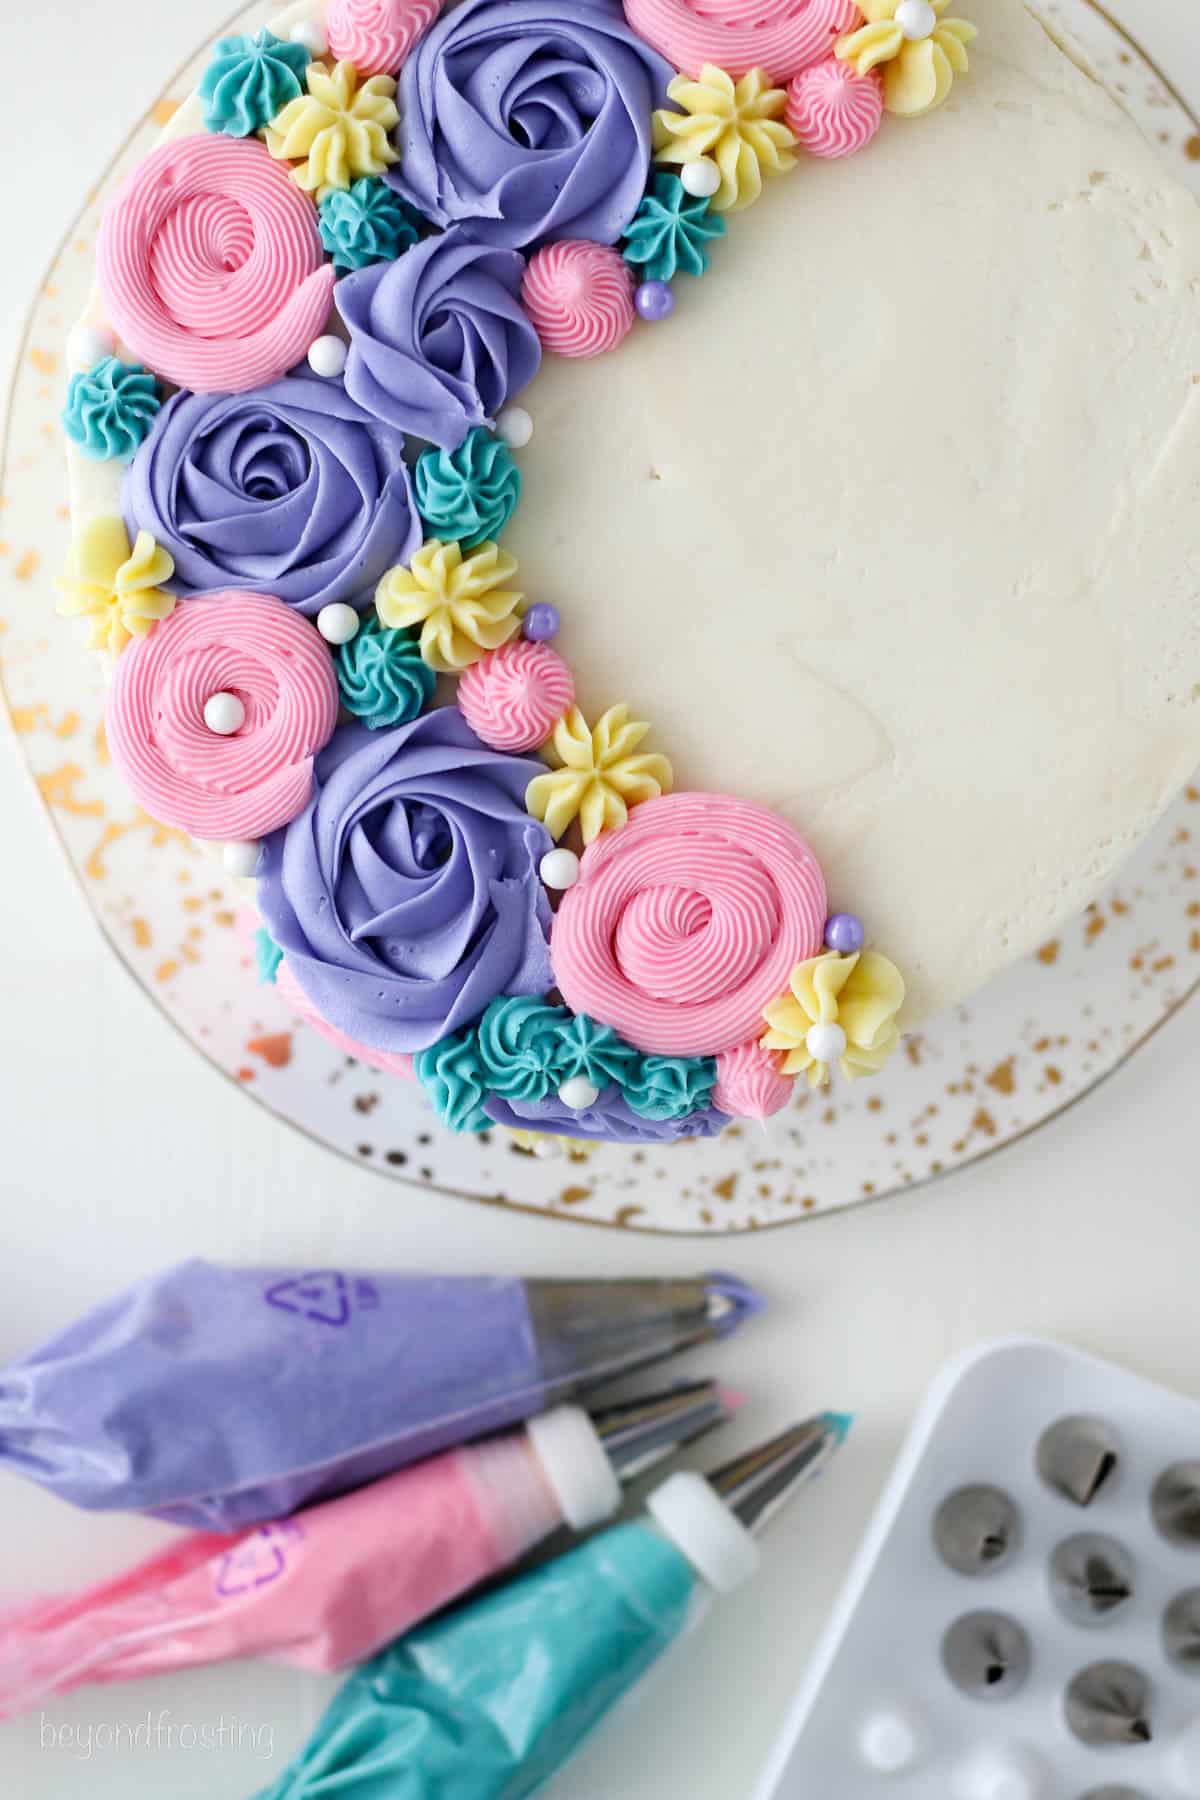 Overhead view of a buttercream flower cake decorated with pastel frosting rosettes and flowers, next to piping bags and tools used for decorating.